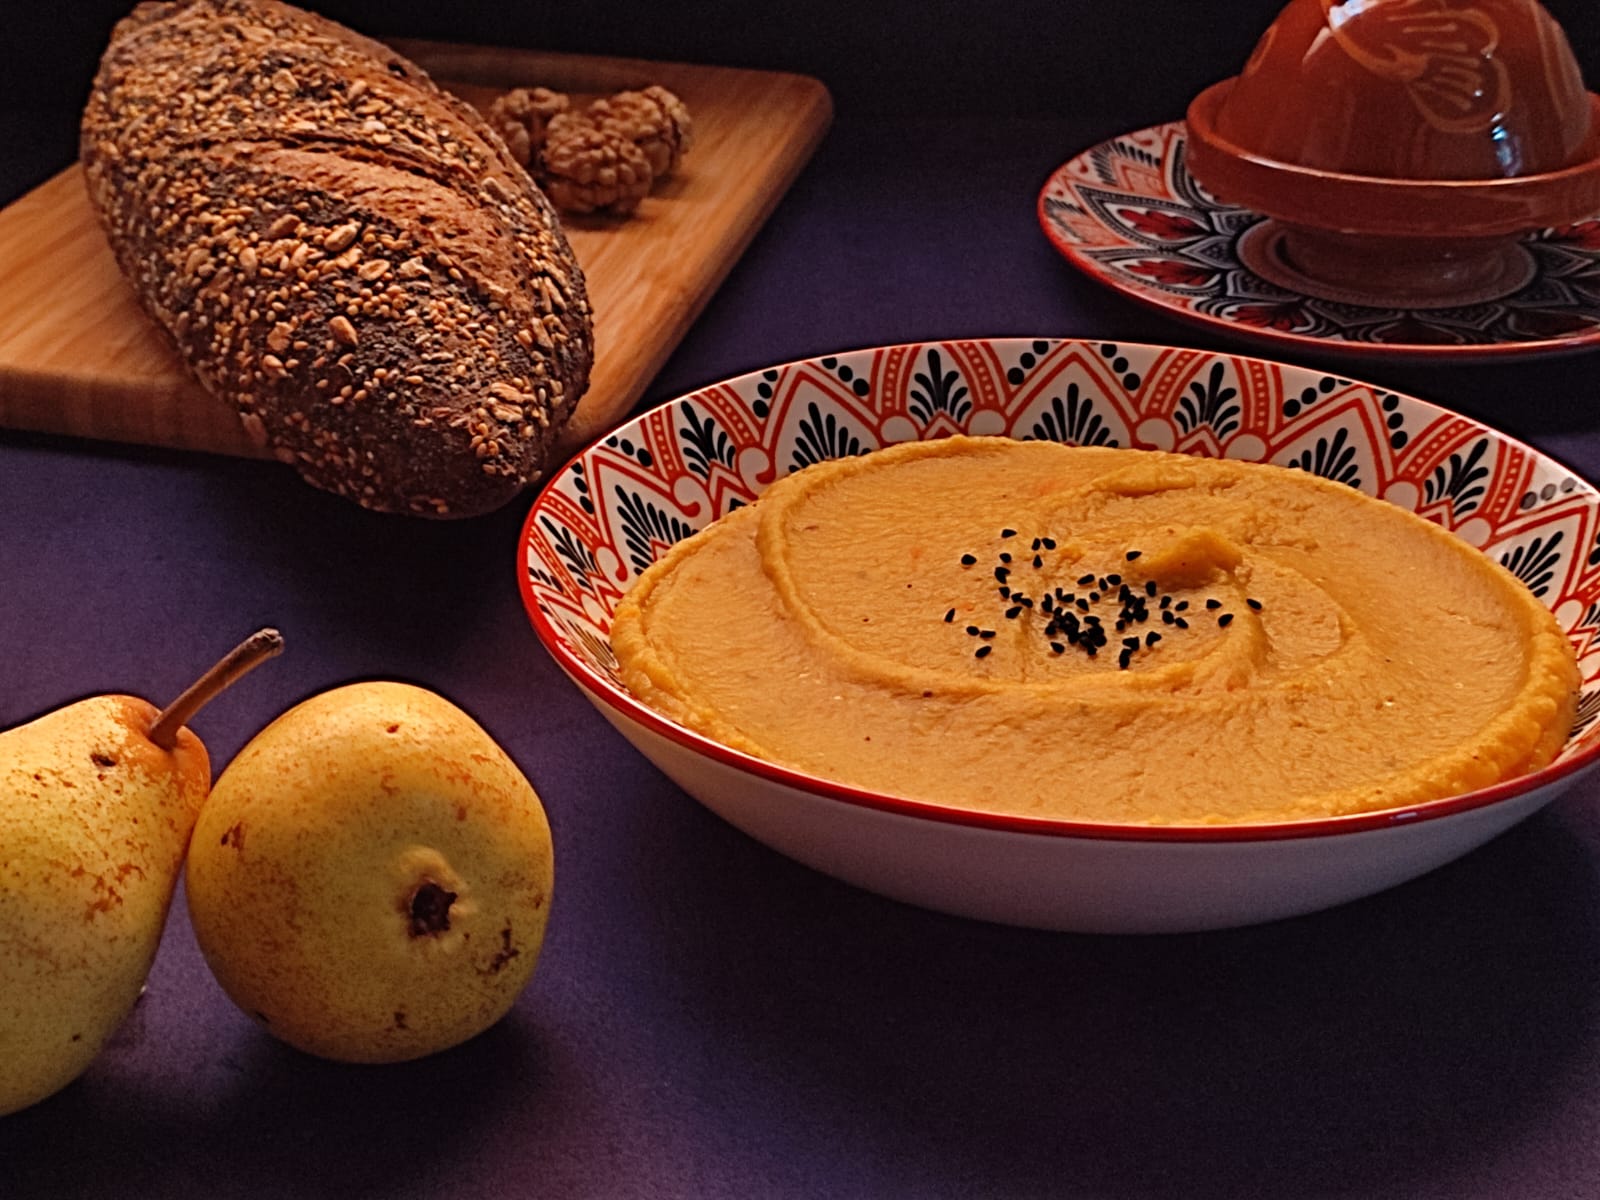 A bowl of red lentils sweet potato soup along side with bread and sone pears.